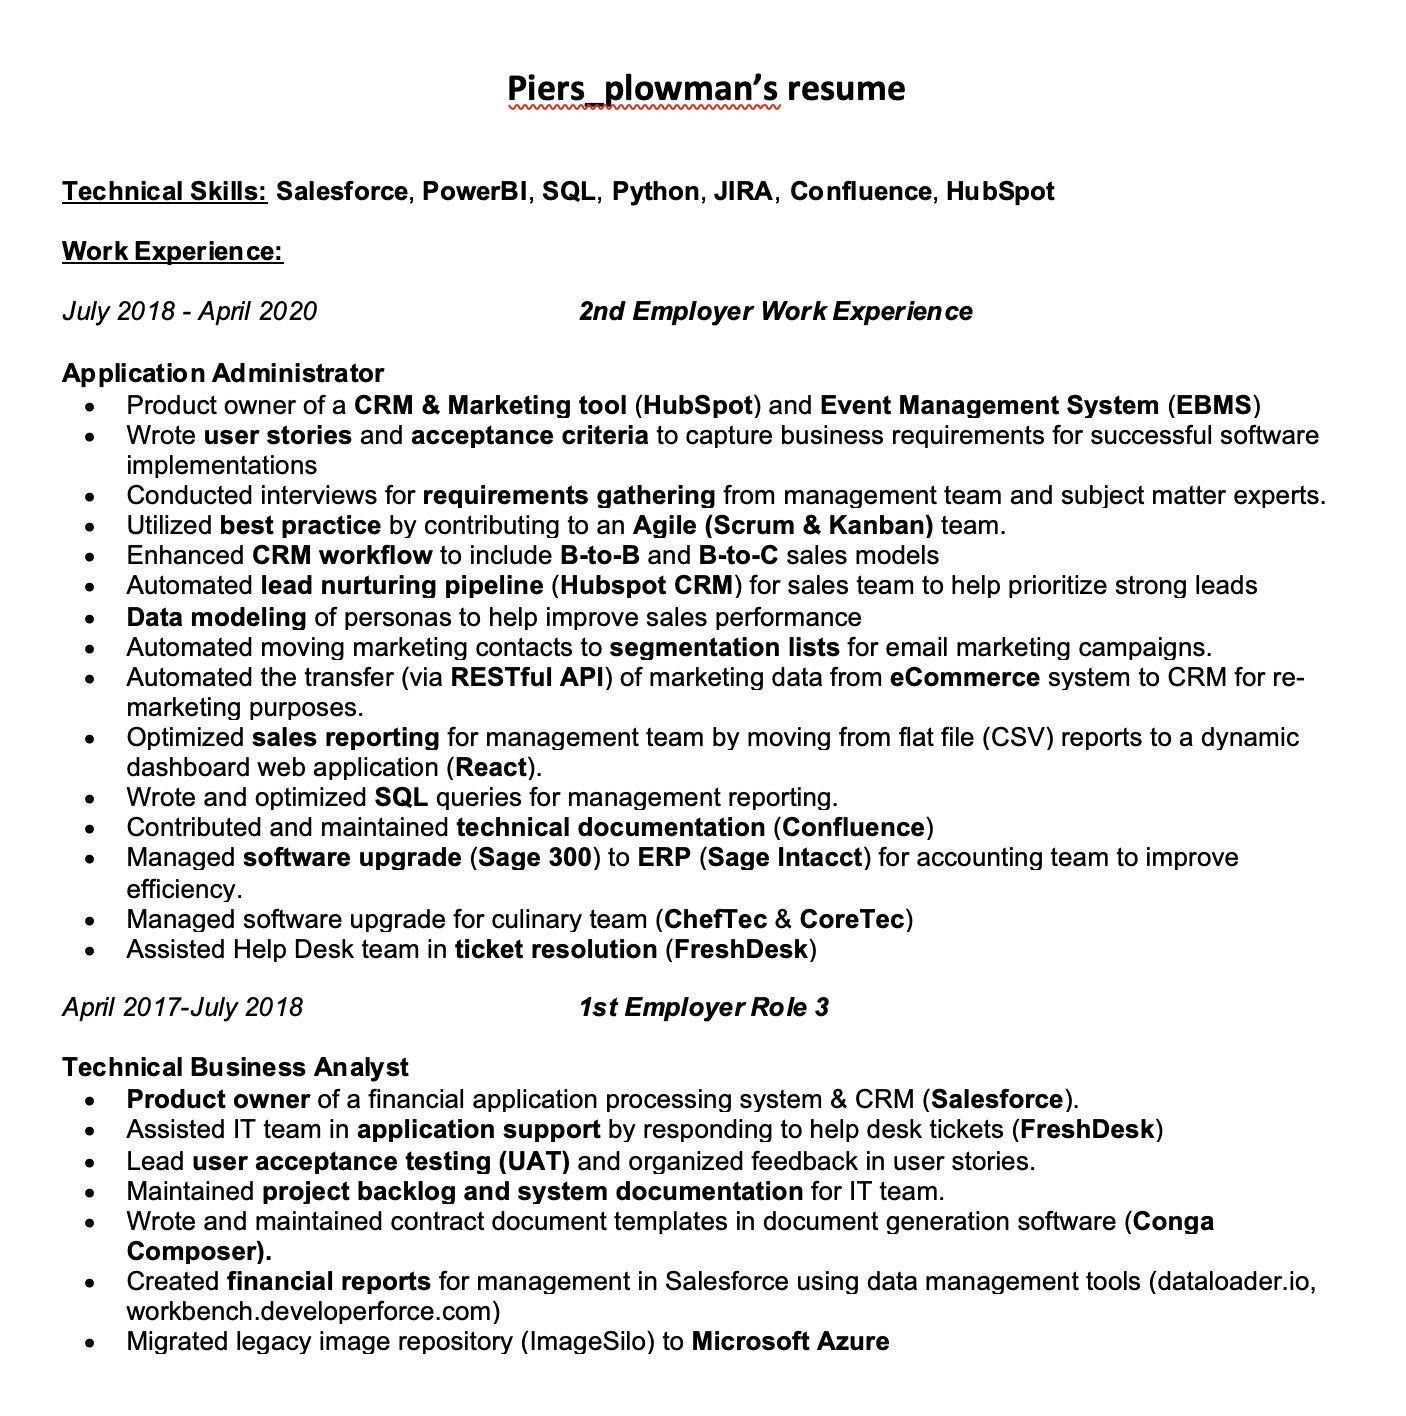 Salesforce Developer with Conga Composer Sample Resume Business Analyst Looking for Resume Advice : R/resumes